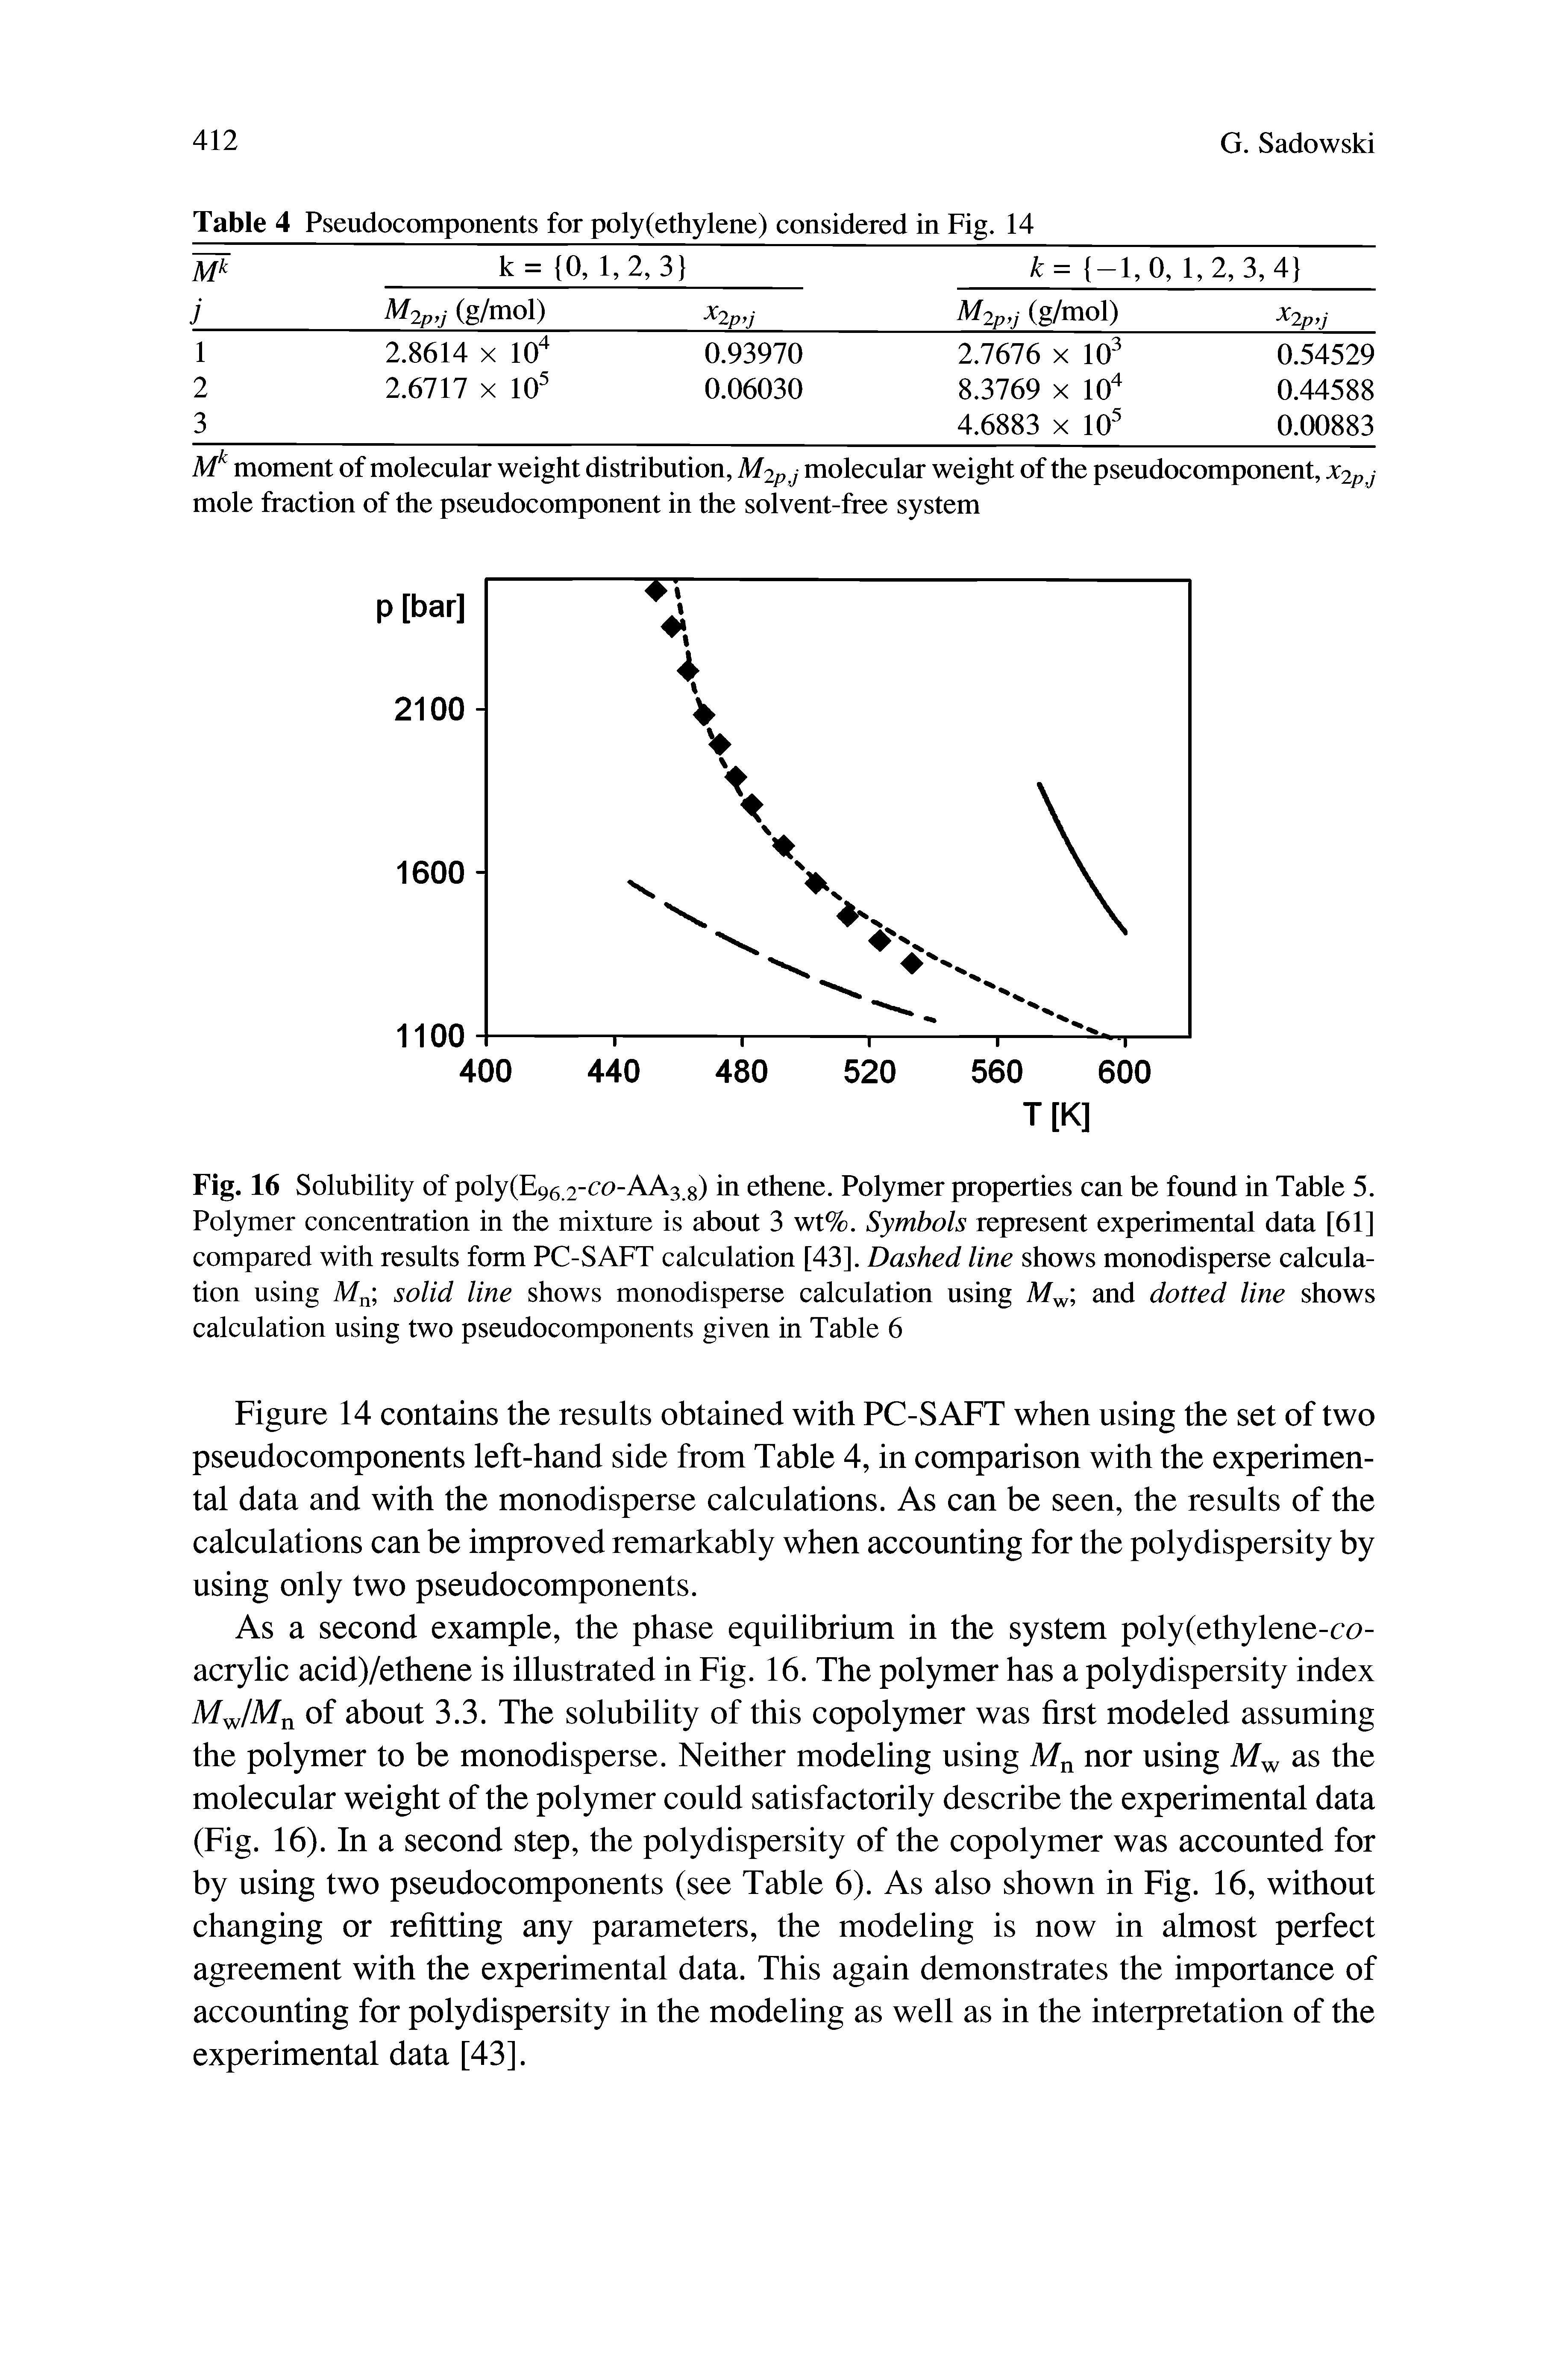 Fig. 16 Solubility of poly(E96.2-co-AA3 g) in ethene. Polymer properties can be found in Table 5. Polymer concentration in the mixture is about 3 wt%. Symbols represent experimental data [61] compared with results form PC-SAFT calculation [43]. Dashed line shows monodisperse calculation using Mn solid line shows monodisperse calculation using M and dotted line shows calculation using two pseudocomponents given in Table 6...